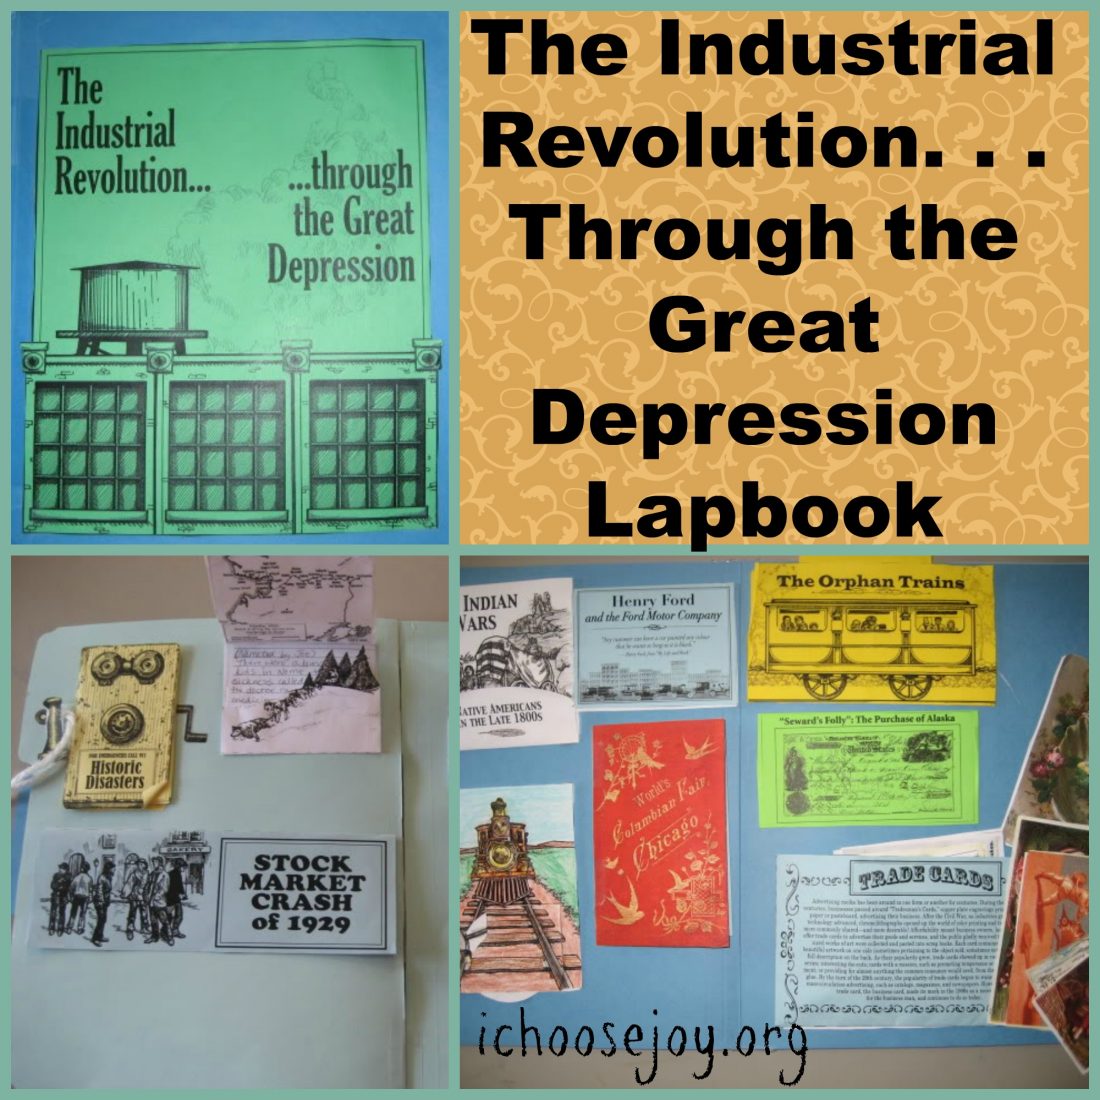 The Industrial Revolution thru Great Depression Lapbook from Homeschool in the Woods. See the pictures of our lapbook and see how these great materials from Homeschool in the Woods can be use to supplement any homeschool history curriculum. From I Choose Joy!